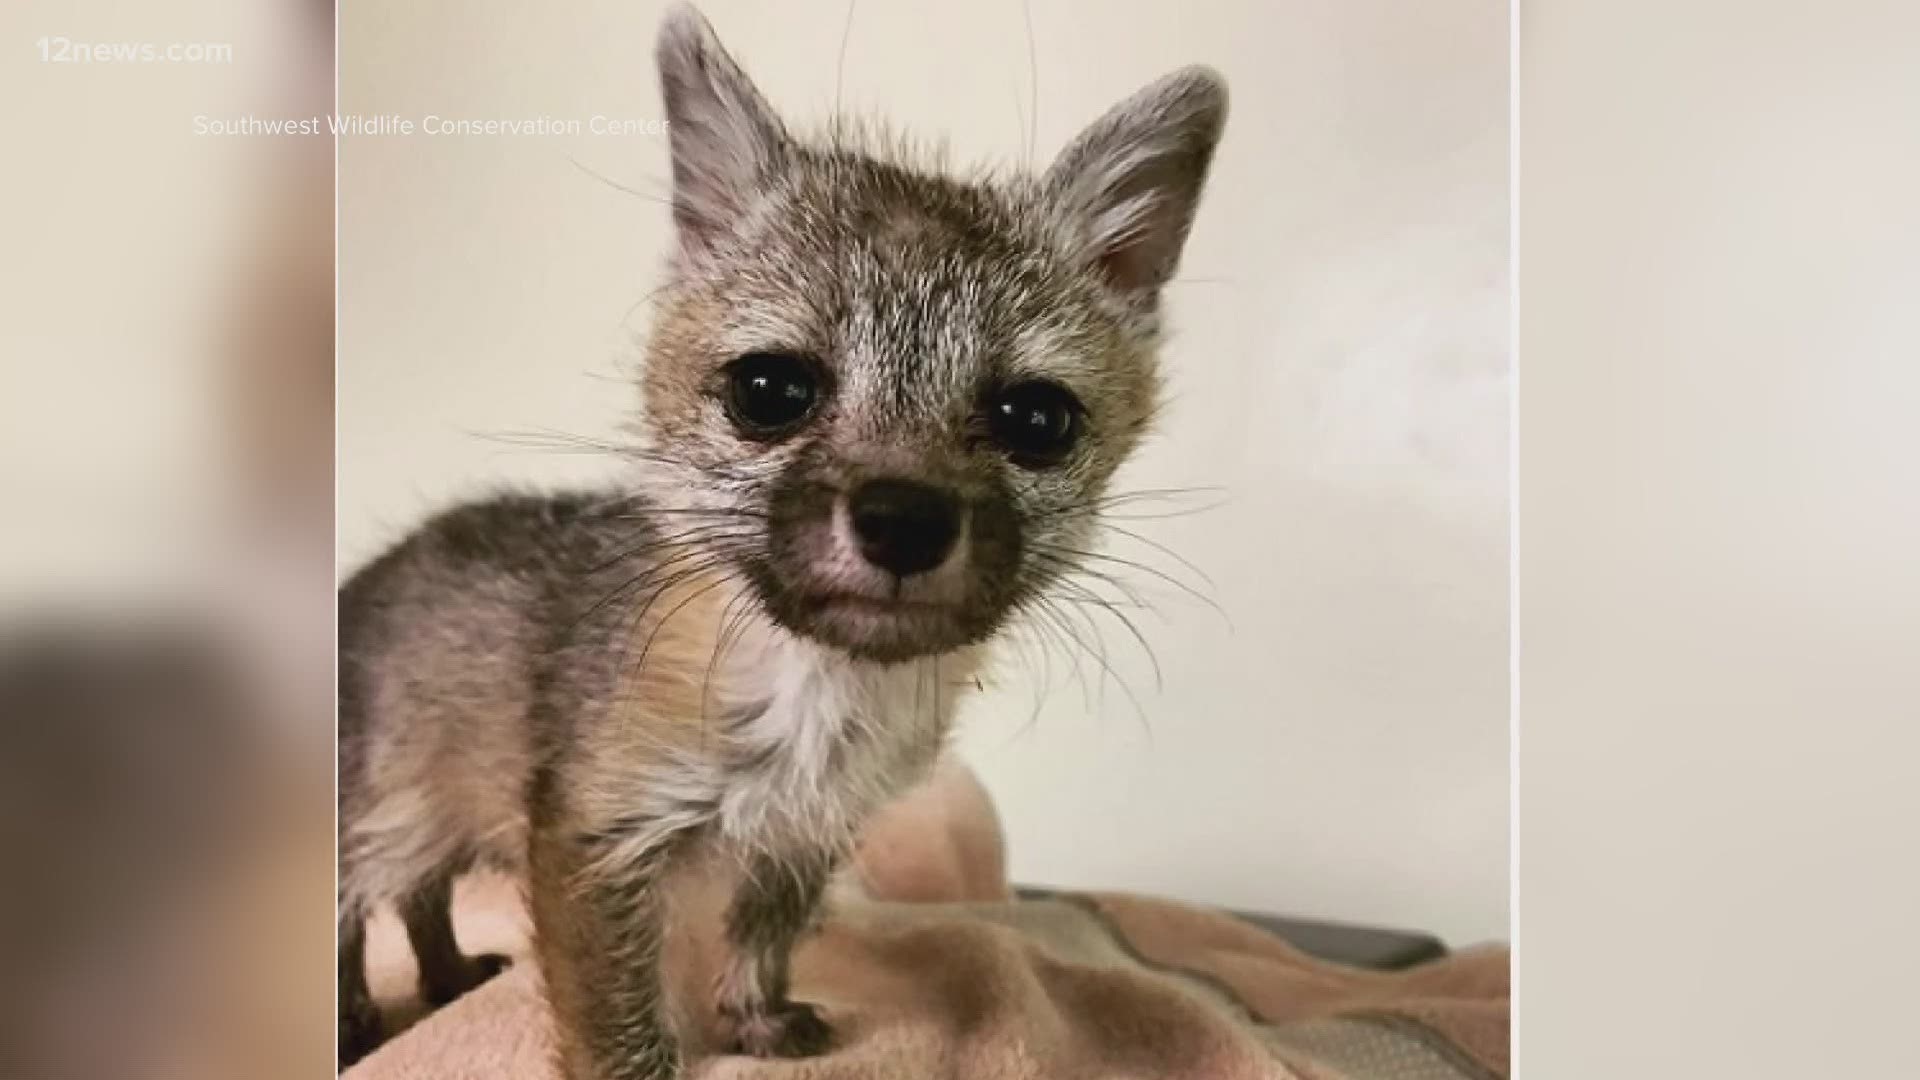 Maybe Dr. Seuss said it best when he wrote "Fox in Socks," but one Tempe family saved a fox in a box.